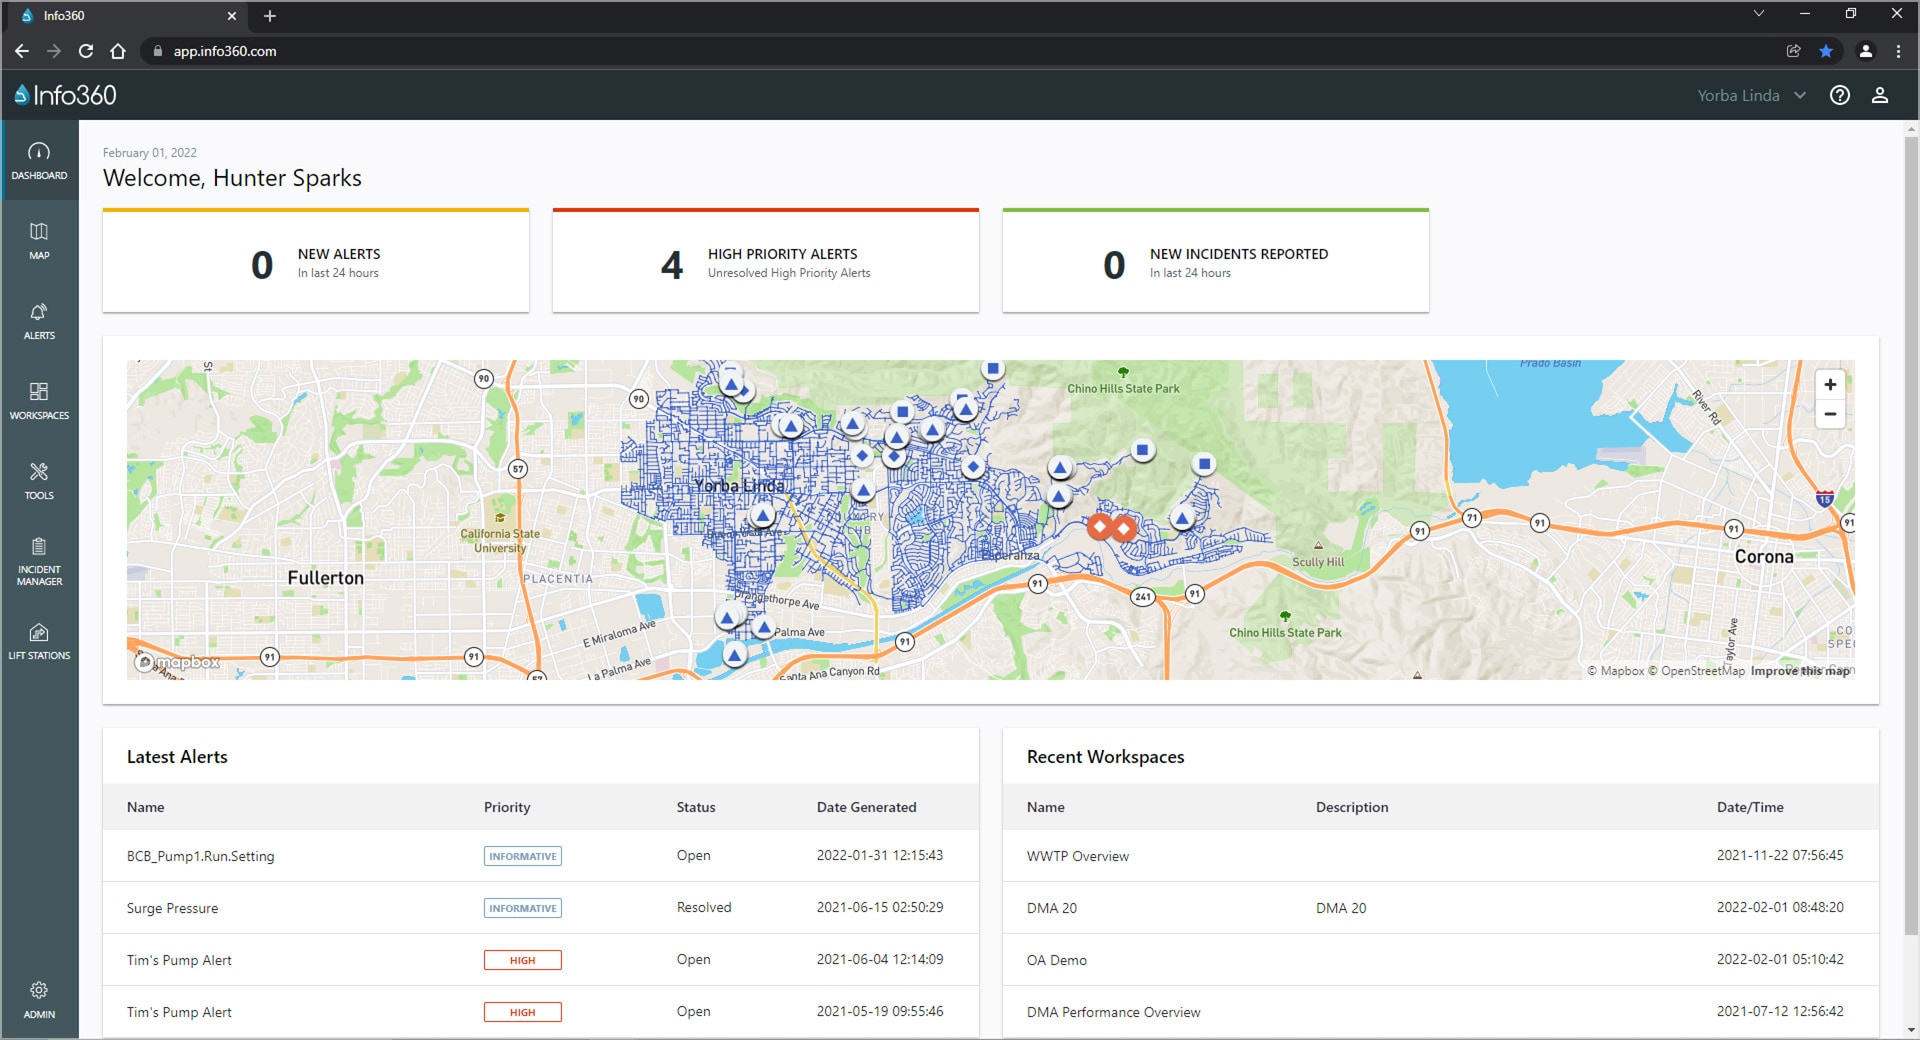 Info360 Insight dashboard with map and detail of incidents